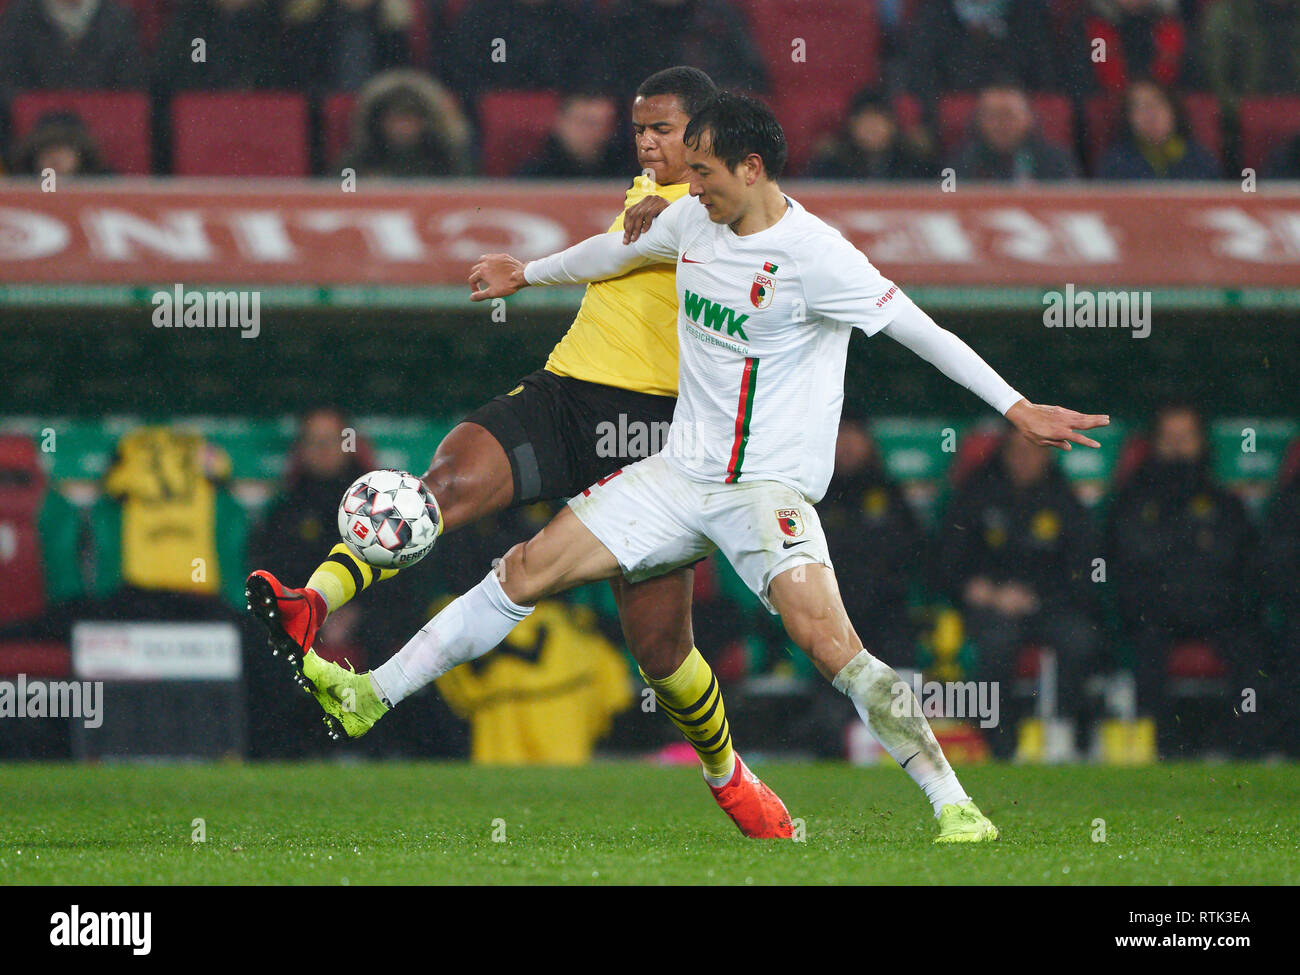 Augsburg, Germany. 01st Mar, 2019. Dong-Won JI, FCA 22 compete for the ball, tackling, duel, header, action, fight against Abdou-Lakhad DIALLO, BVB 4 FC AUGSBURG - BORUSSIA DORTMUND 2-1 - DFL REGULATIONS PROHIBIT ANY USE OF PHOTOGRAPHS as IMAGE SEQUENCES and/or QUASI-VIDEO - 1.German Soccer League, Augsburg, March 1, 2019 Season 2018/2019, matchday 24, BVB, Bavaria Credit: Peter Schatz/Alamy Live News Stock Photo